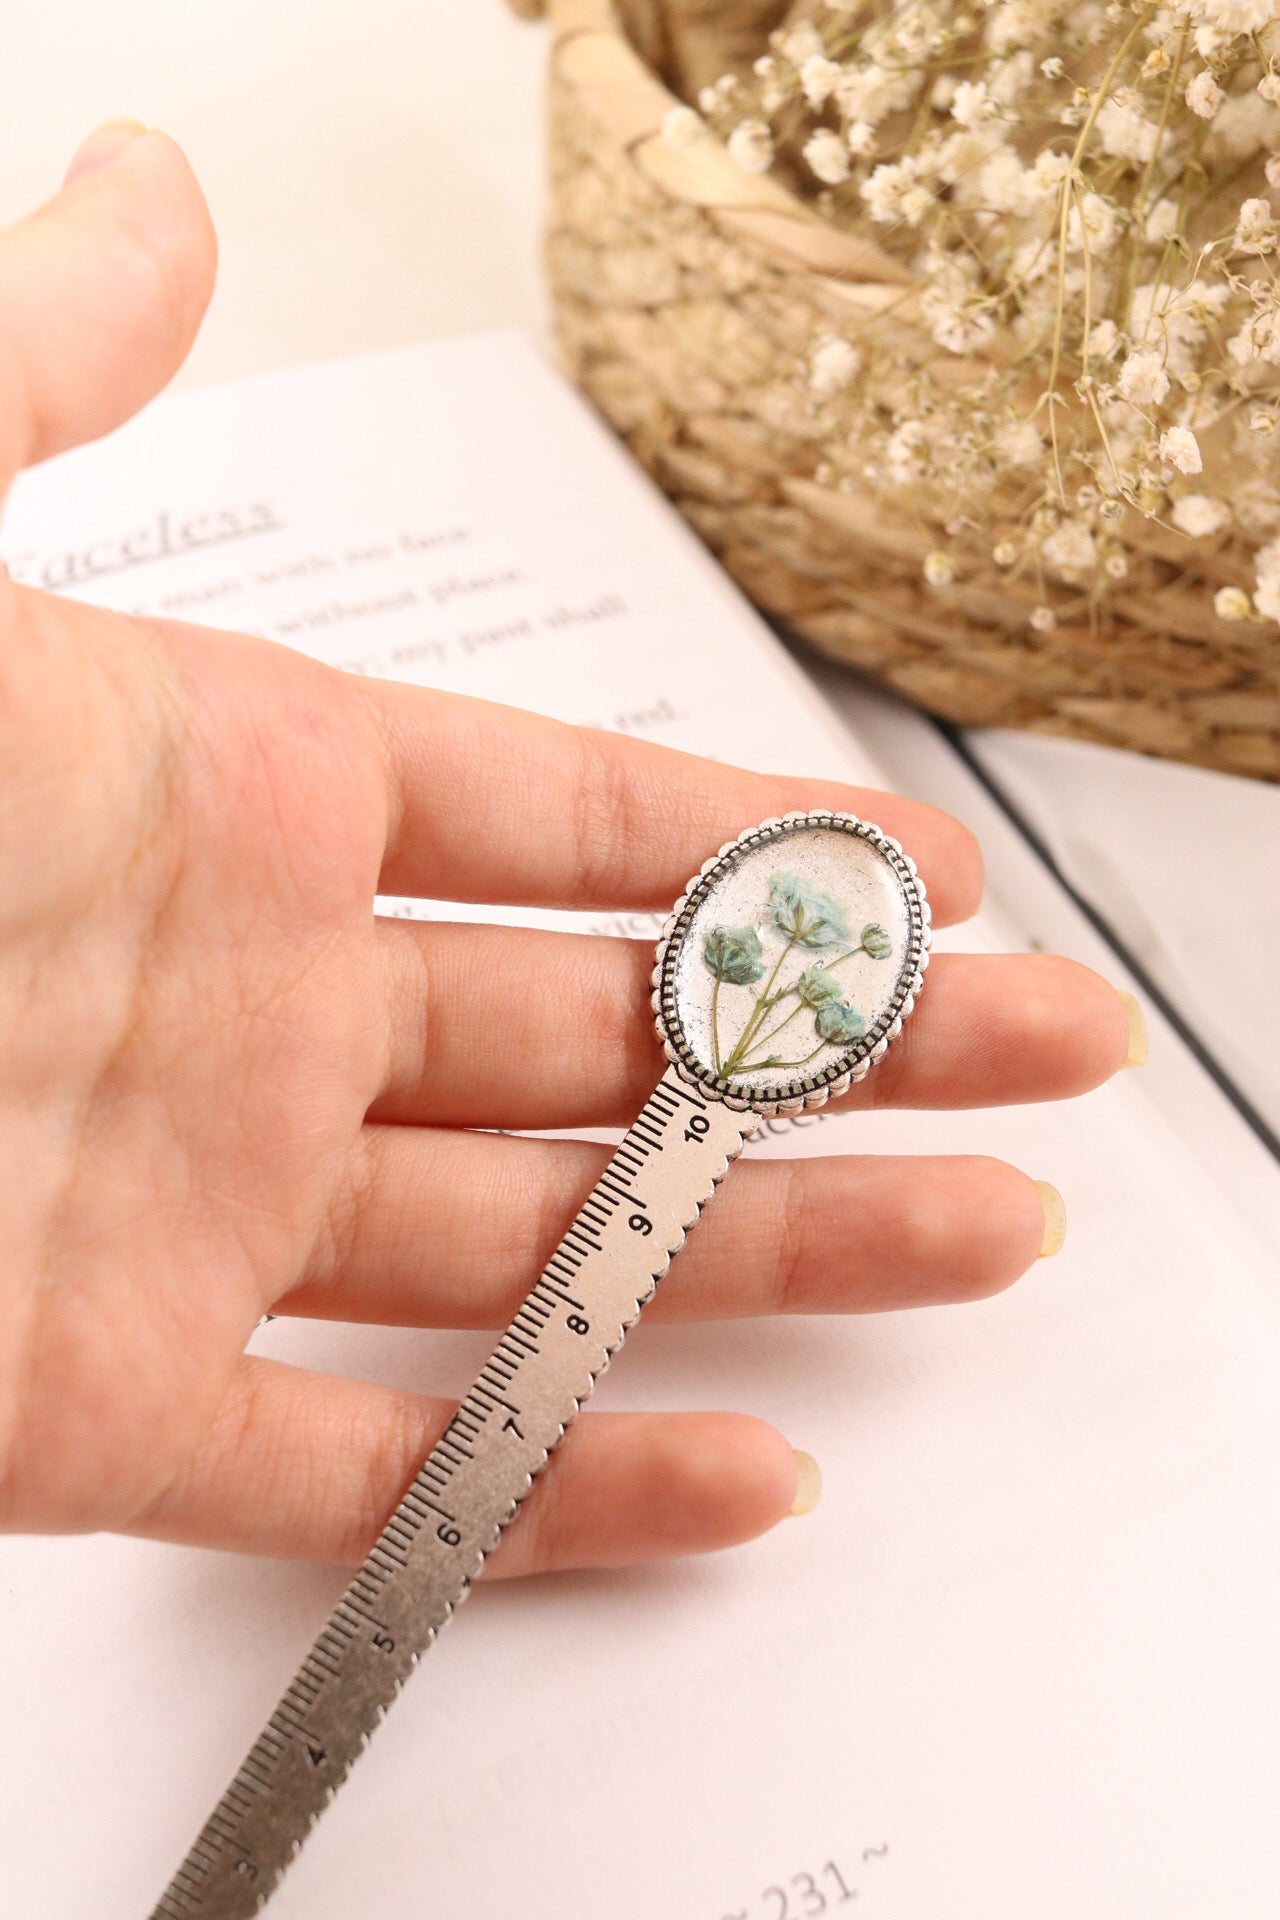 Antique Silver Resin Ruler Bookmark with Blue Baby's Breath Flowers